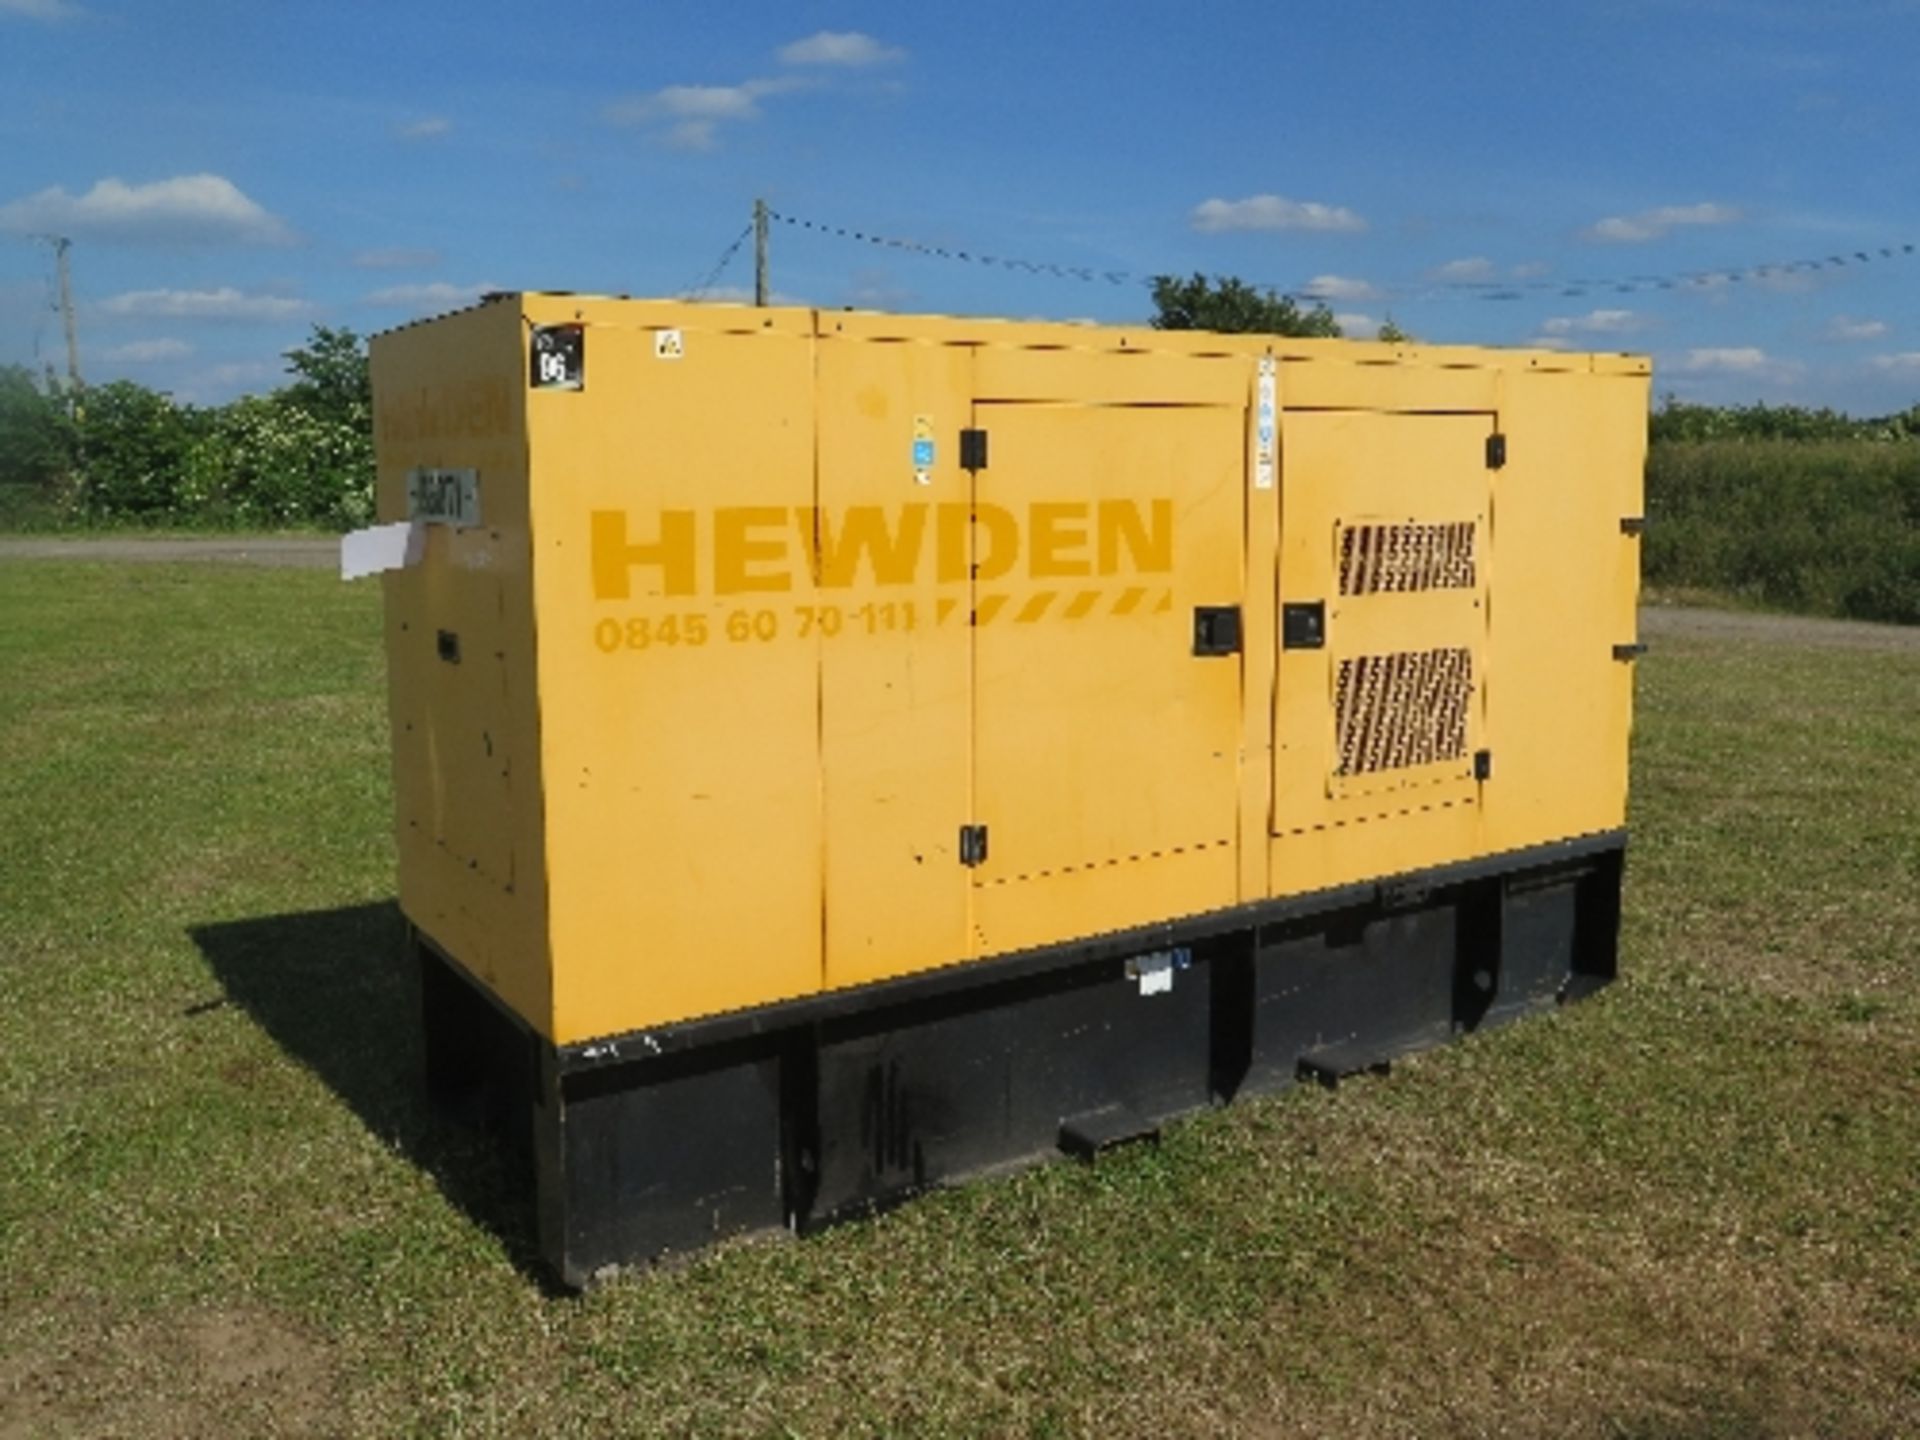 Caterpillar XQE100 generator 17983 hrs 158071
PERKINS - RUNS AND MAKES POWER
ALL LOTS are SOLD